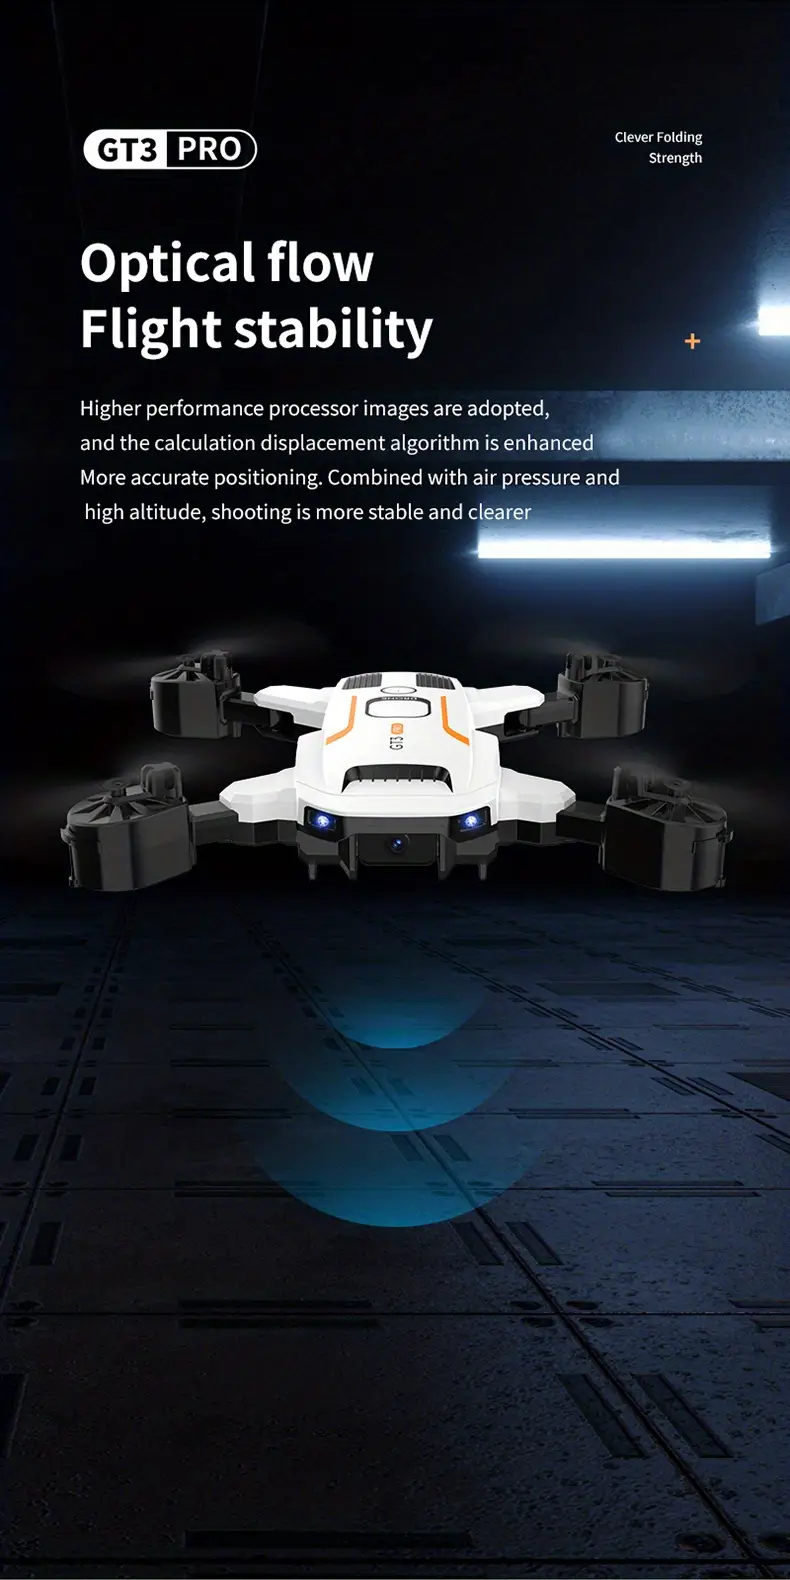 gt3 drone with dual camera 3 batteries optical flow location headless mode altitude hold mode foldable wifi fpv rc quadcopter helicopter toys gift for kids adults beginners details 2